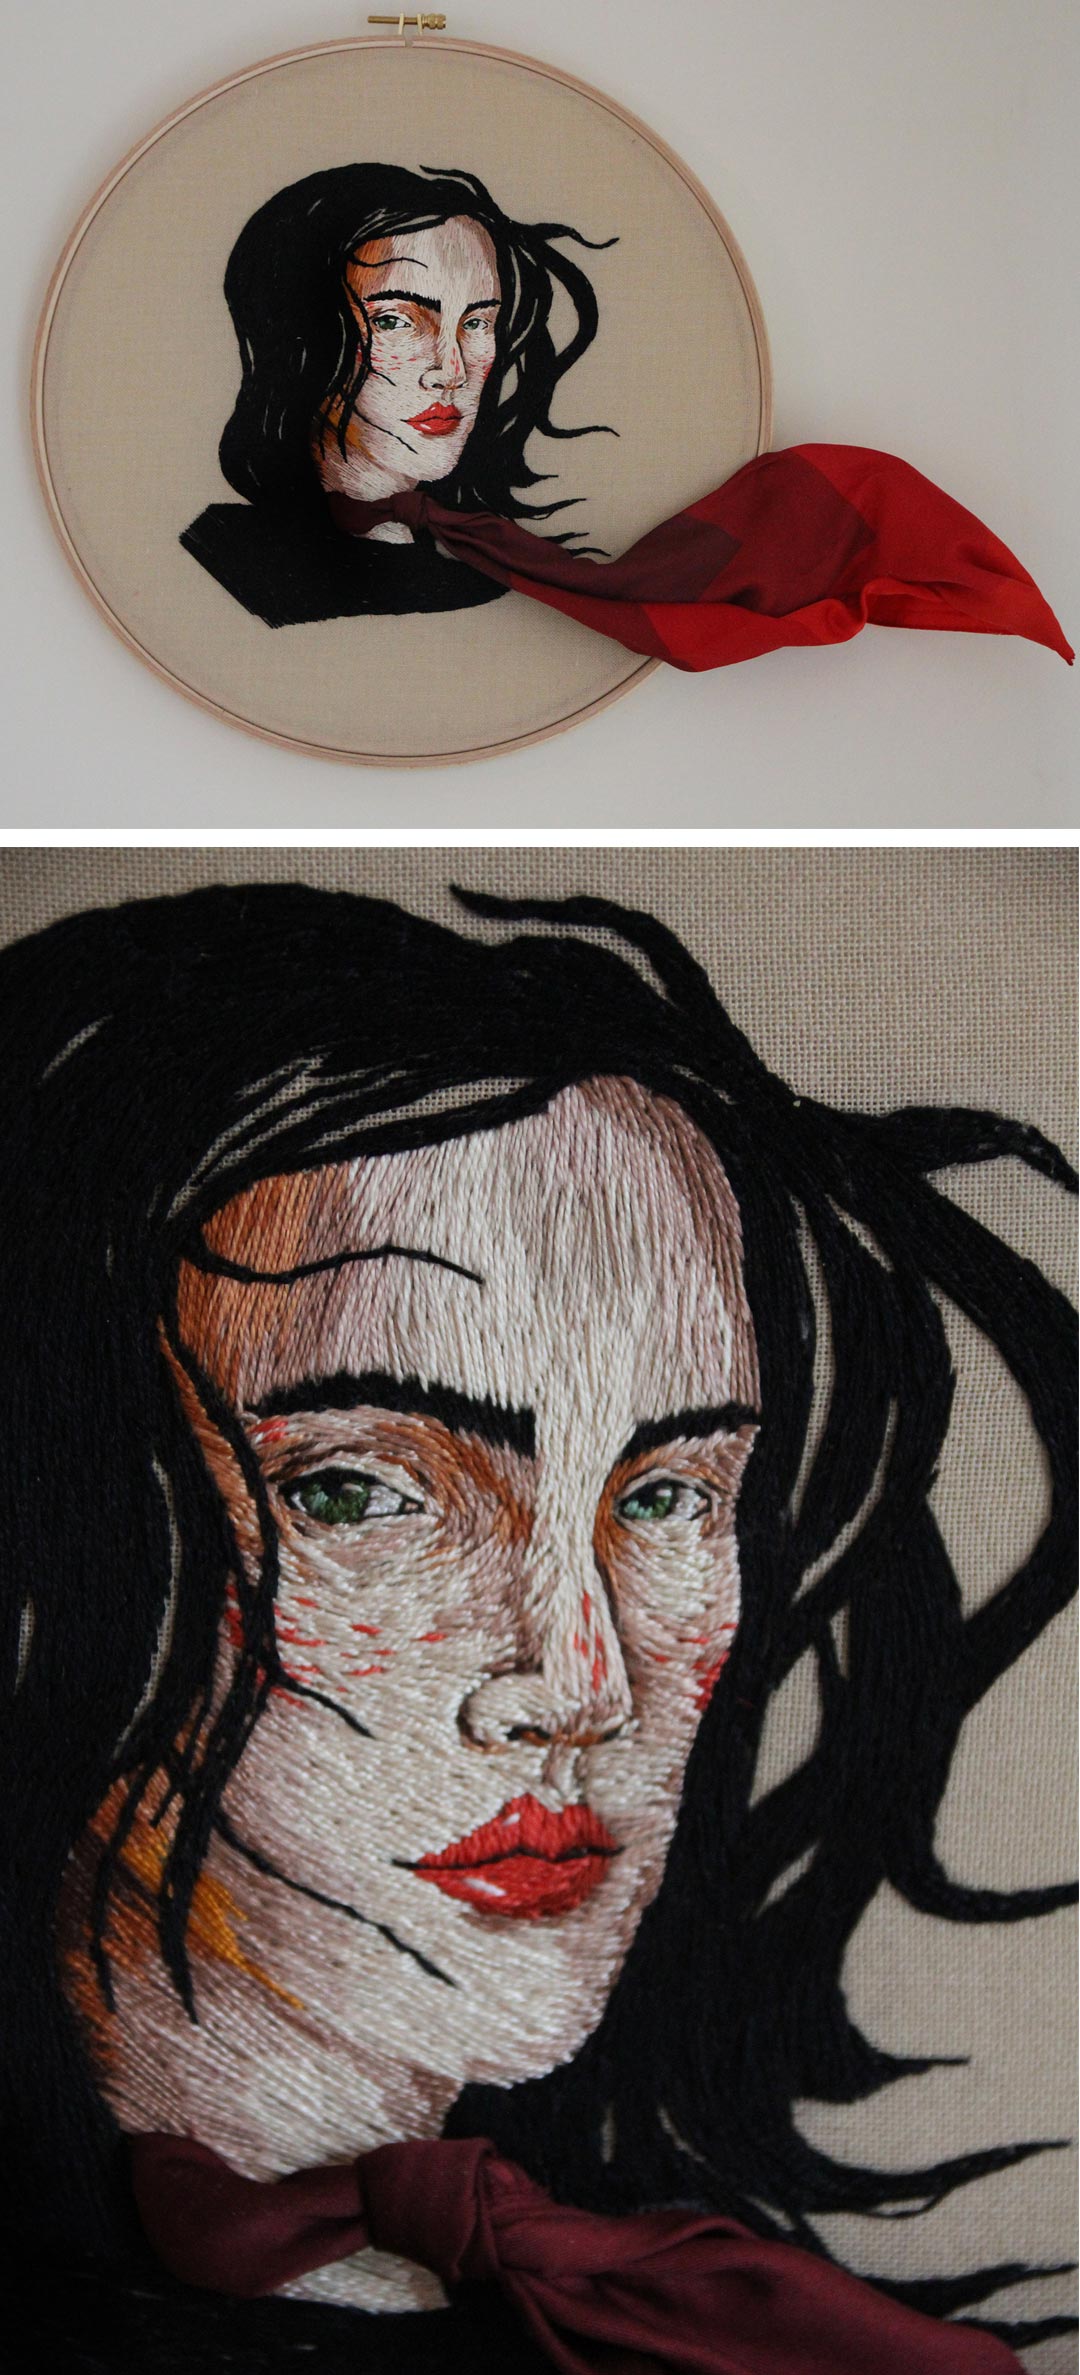 Ezgi Pamir's Embroidered Portraits Dazzle with Real Objects Sewn In